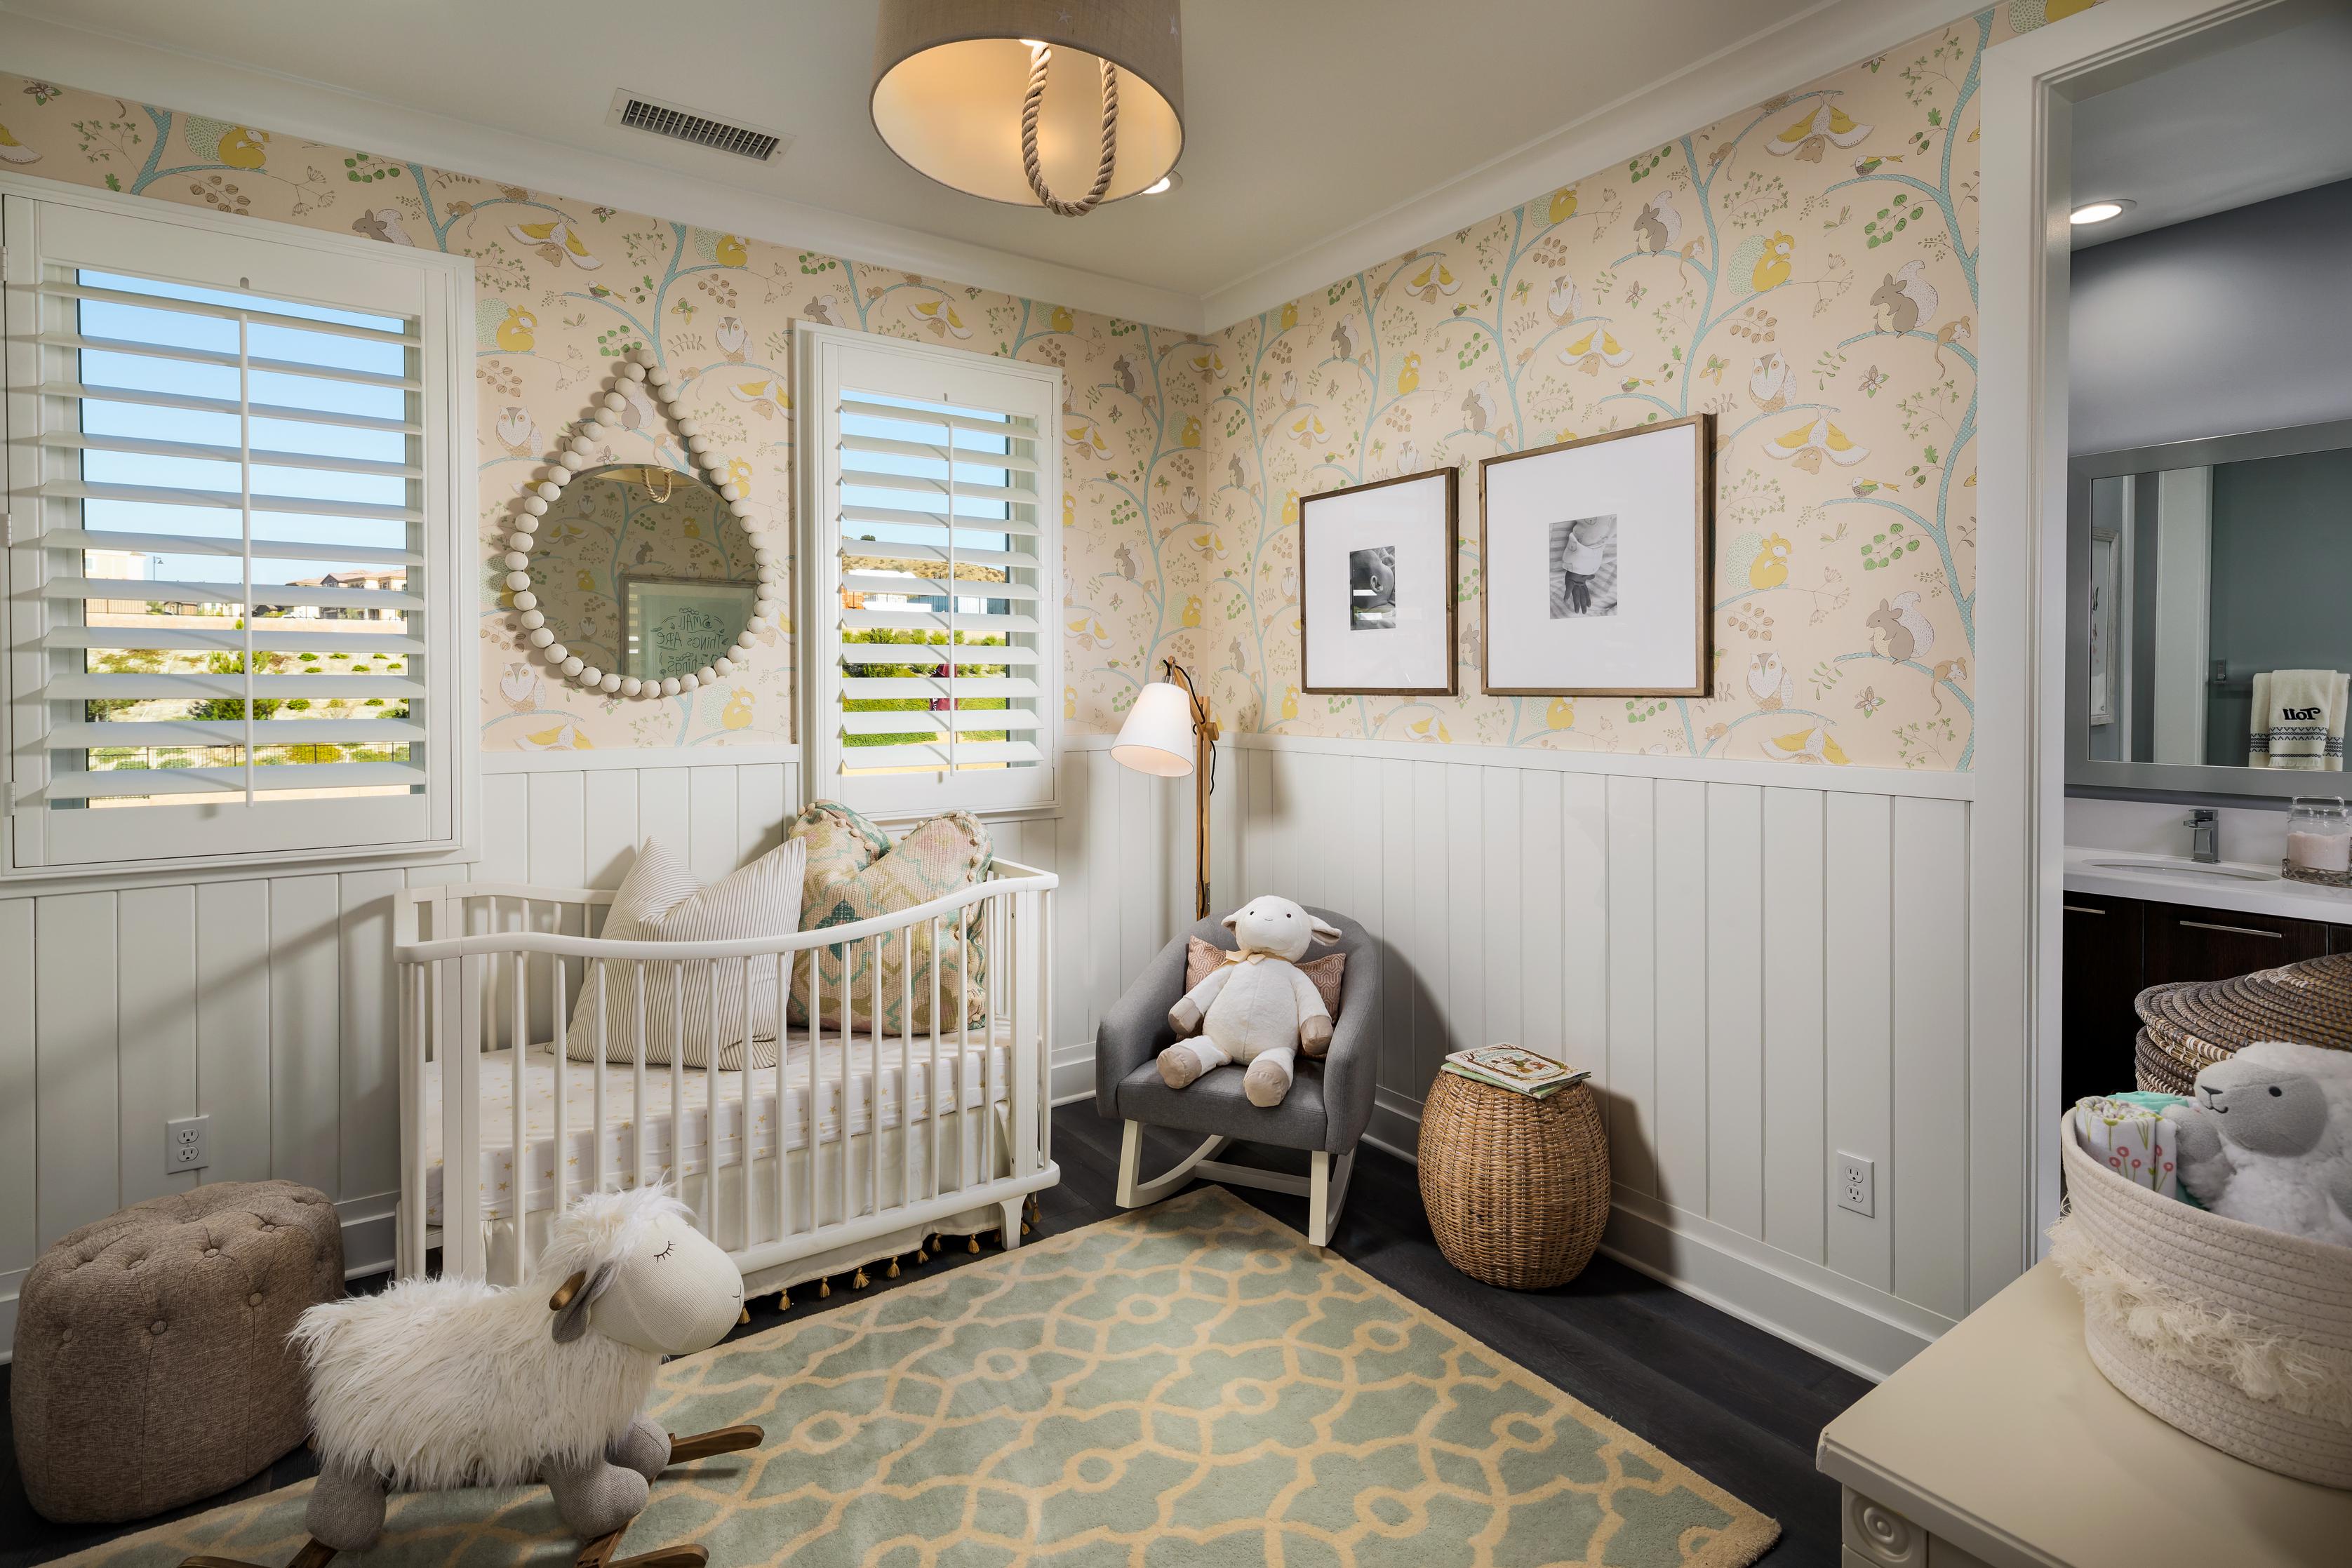 The Right in Kids' Rooms is Crucial | Build Beautiful